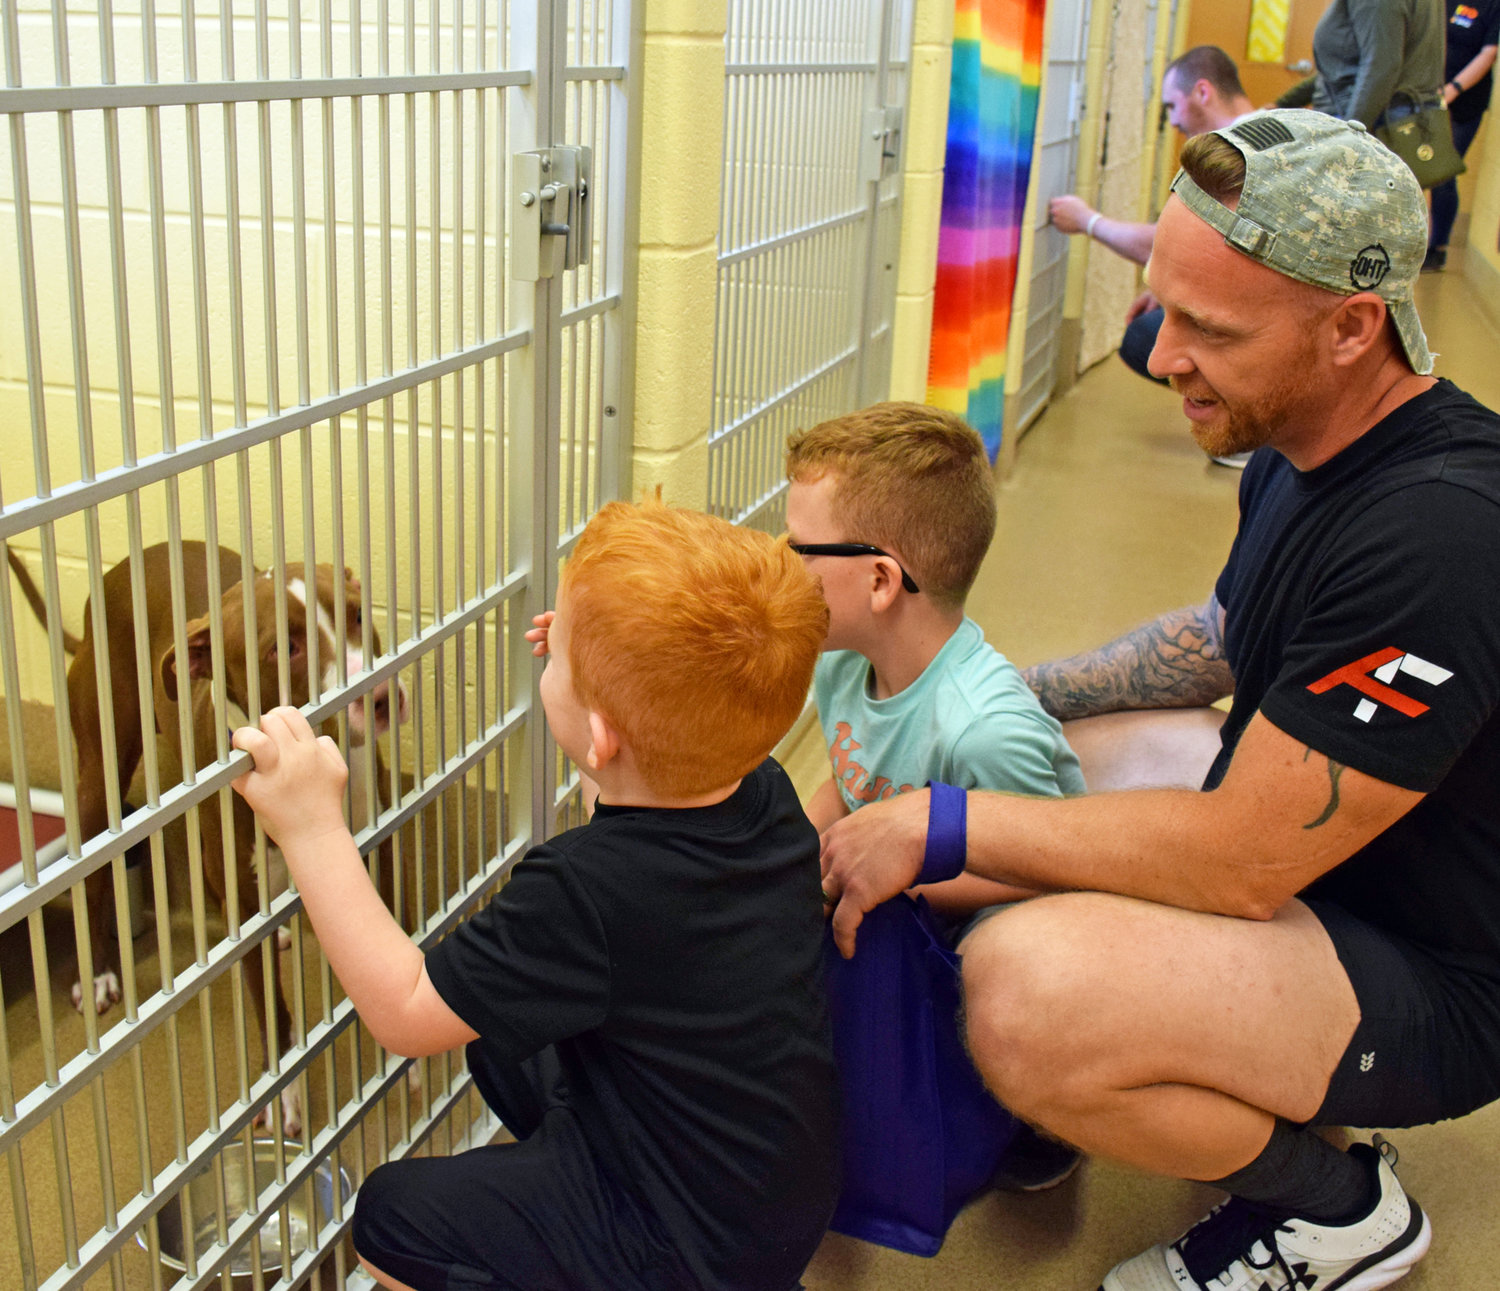 Alex, Alexander and Conor Fillman visit Teddy, a 10-month-old terrier/red nose pitbull mix.